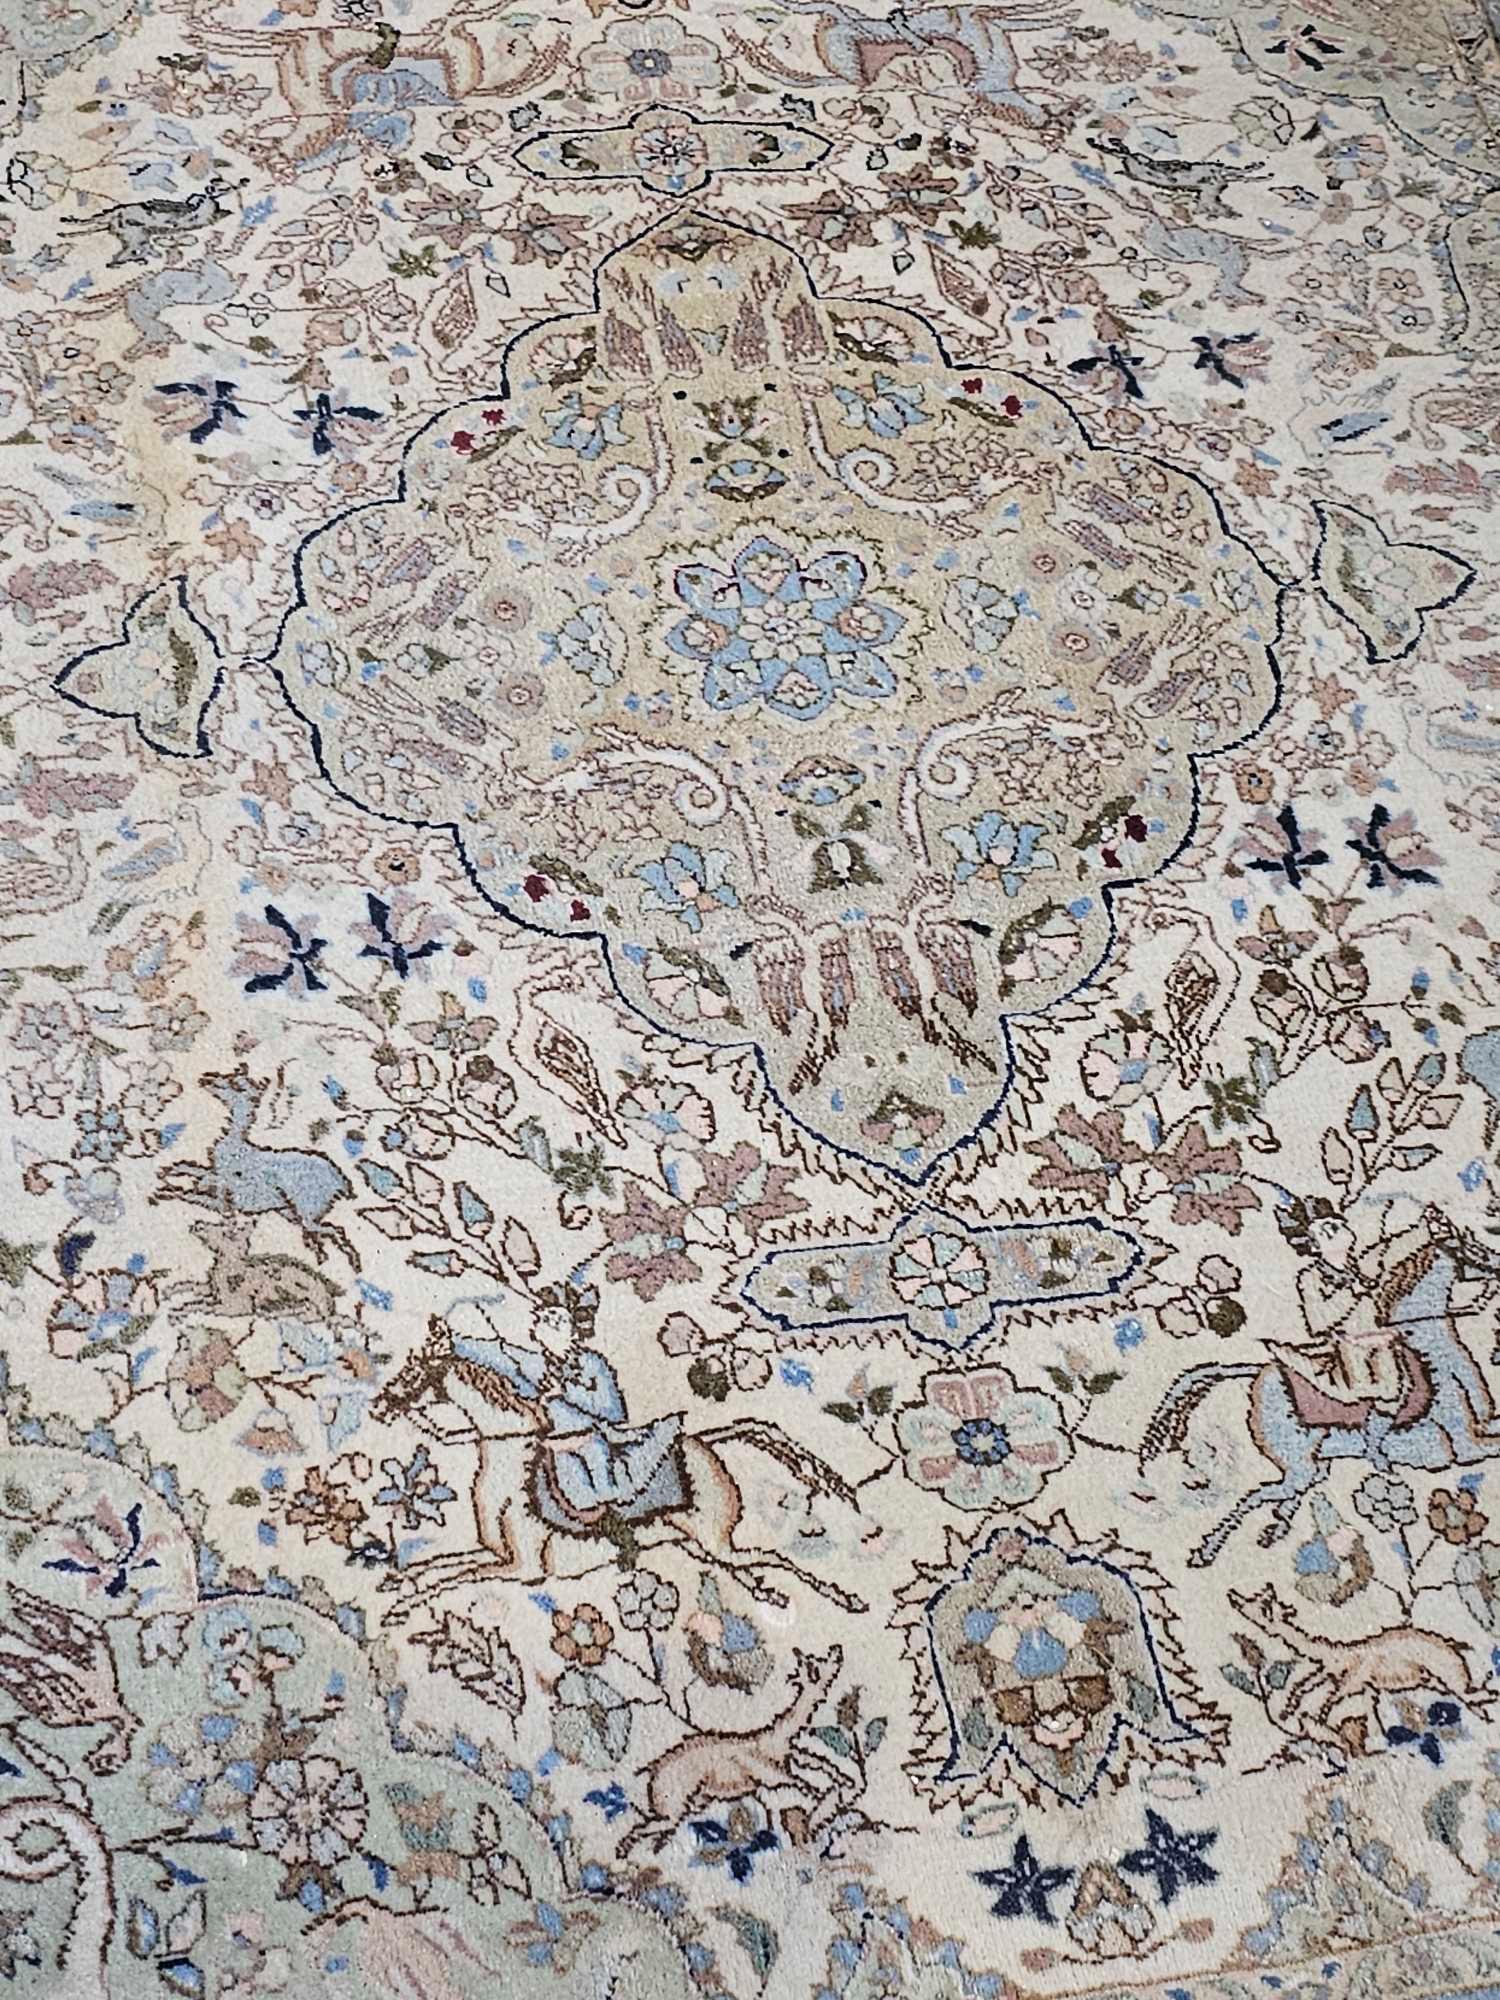 A Persian Patterned Rug The Ivory Field With Lozenge Medallions And Scrolled Spandrels With A - Image 2 of 6